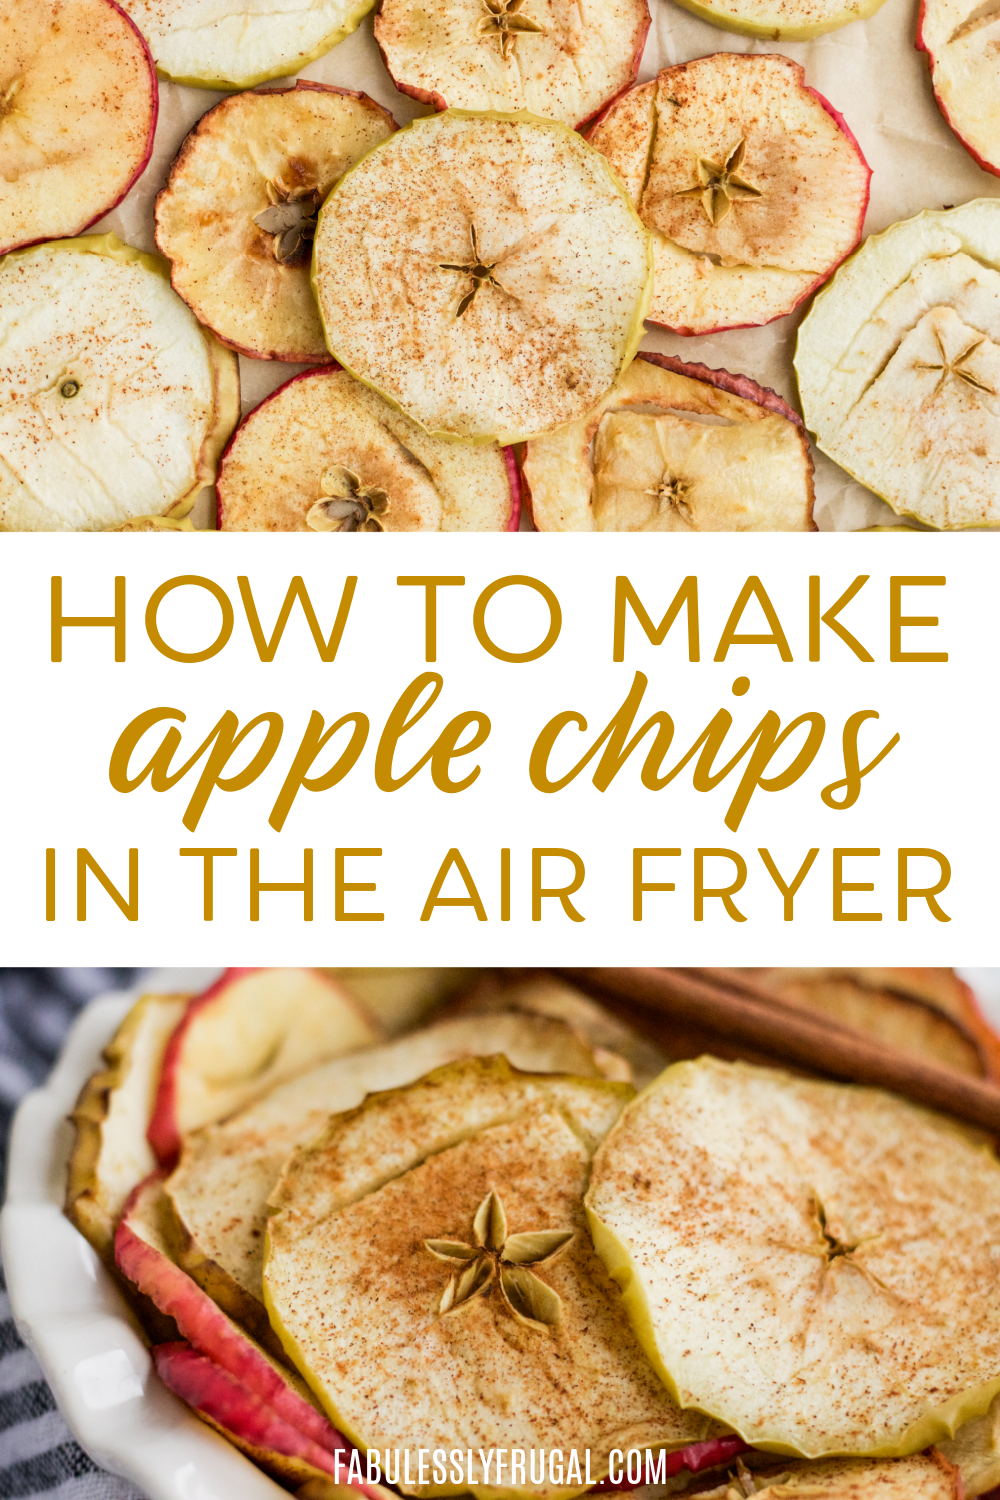 Apple chips in the air fryer are incredibly easy, healthy, and delicious